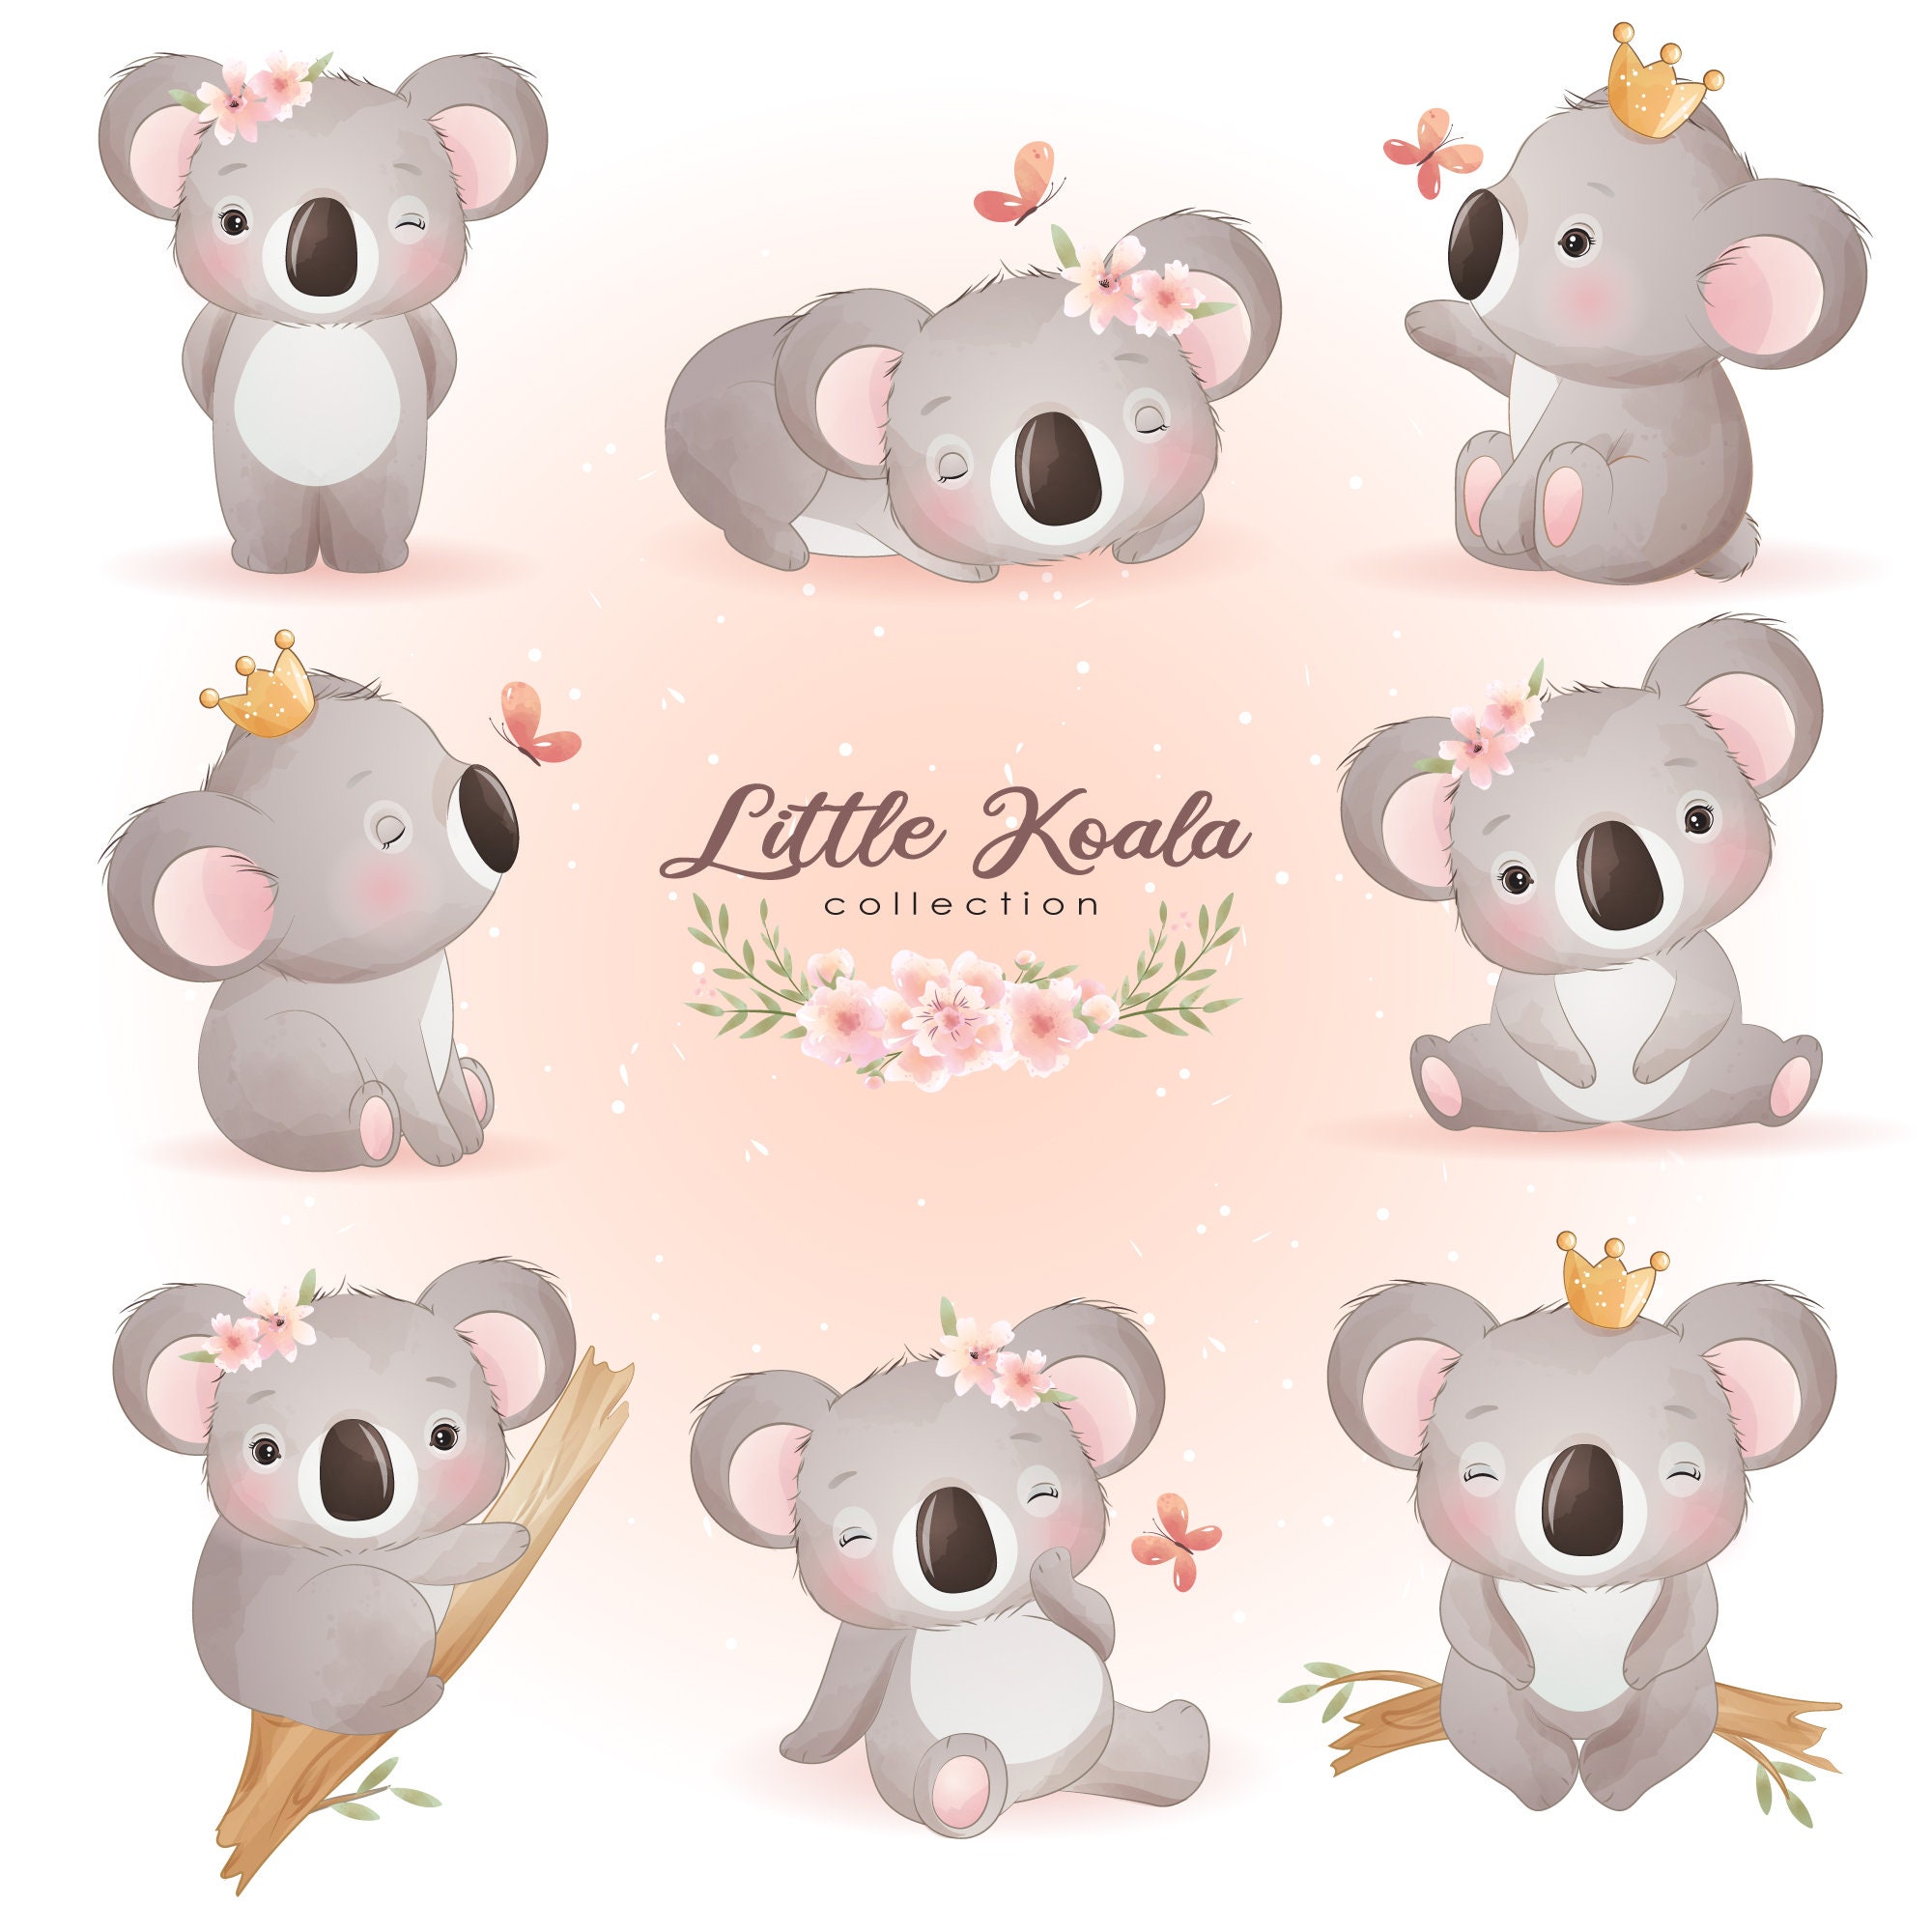 Cute Little koala poses clipart with watercolor illustration